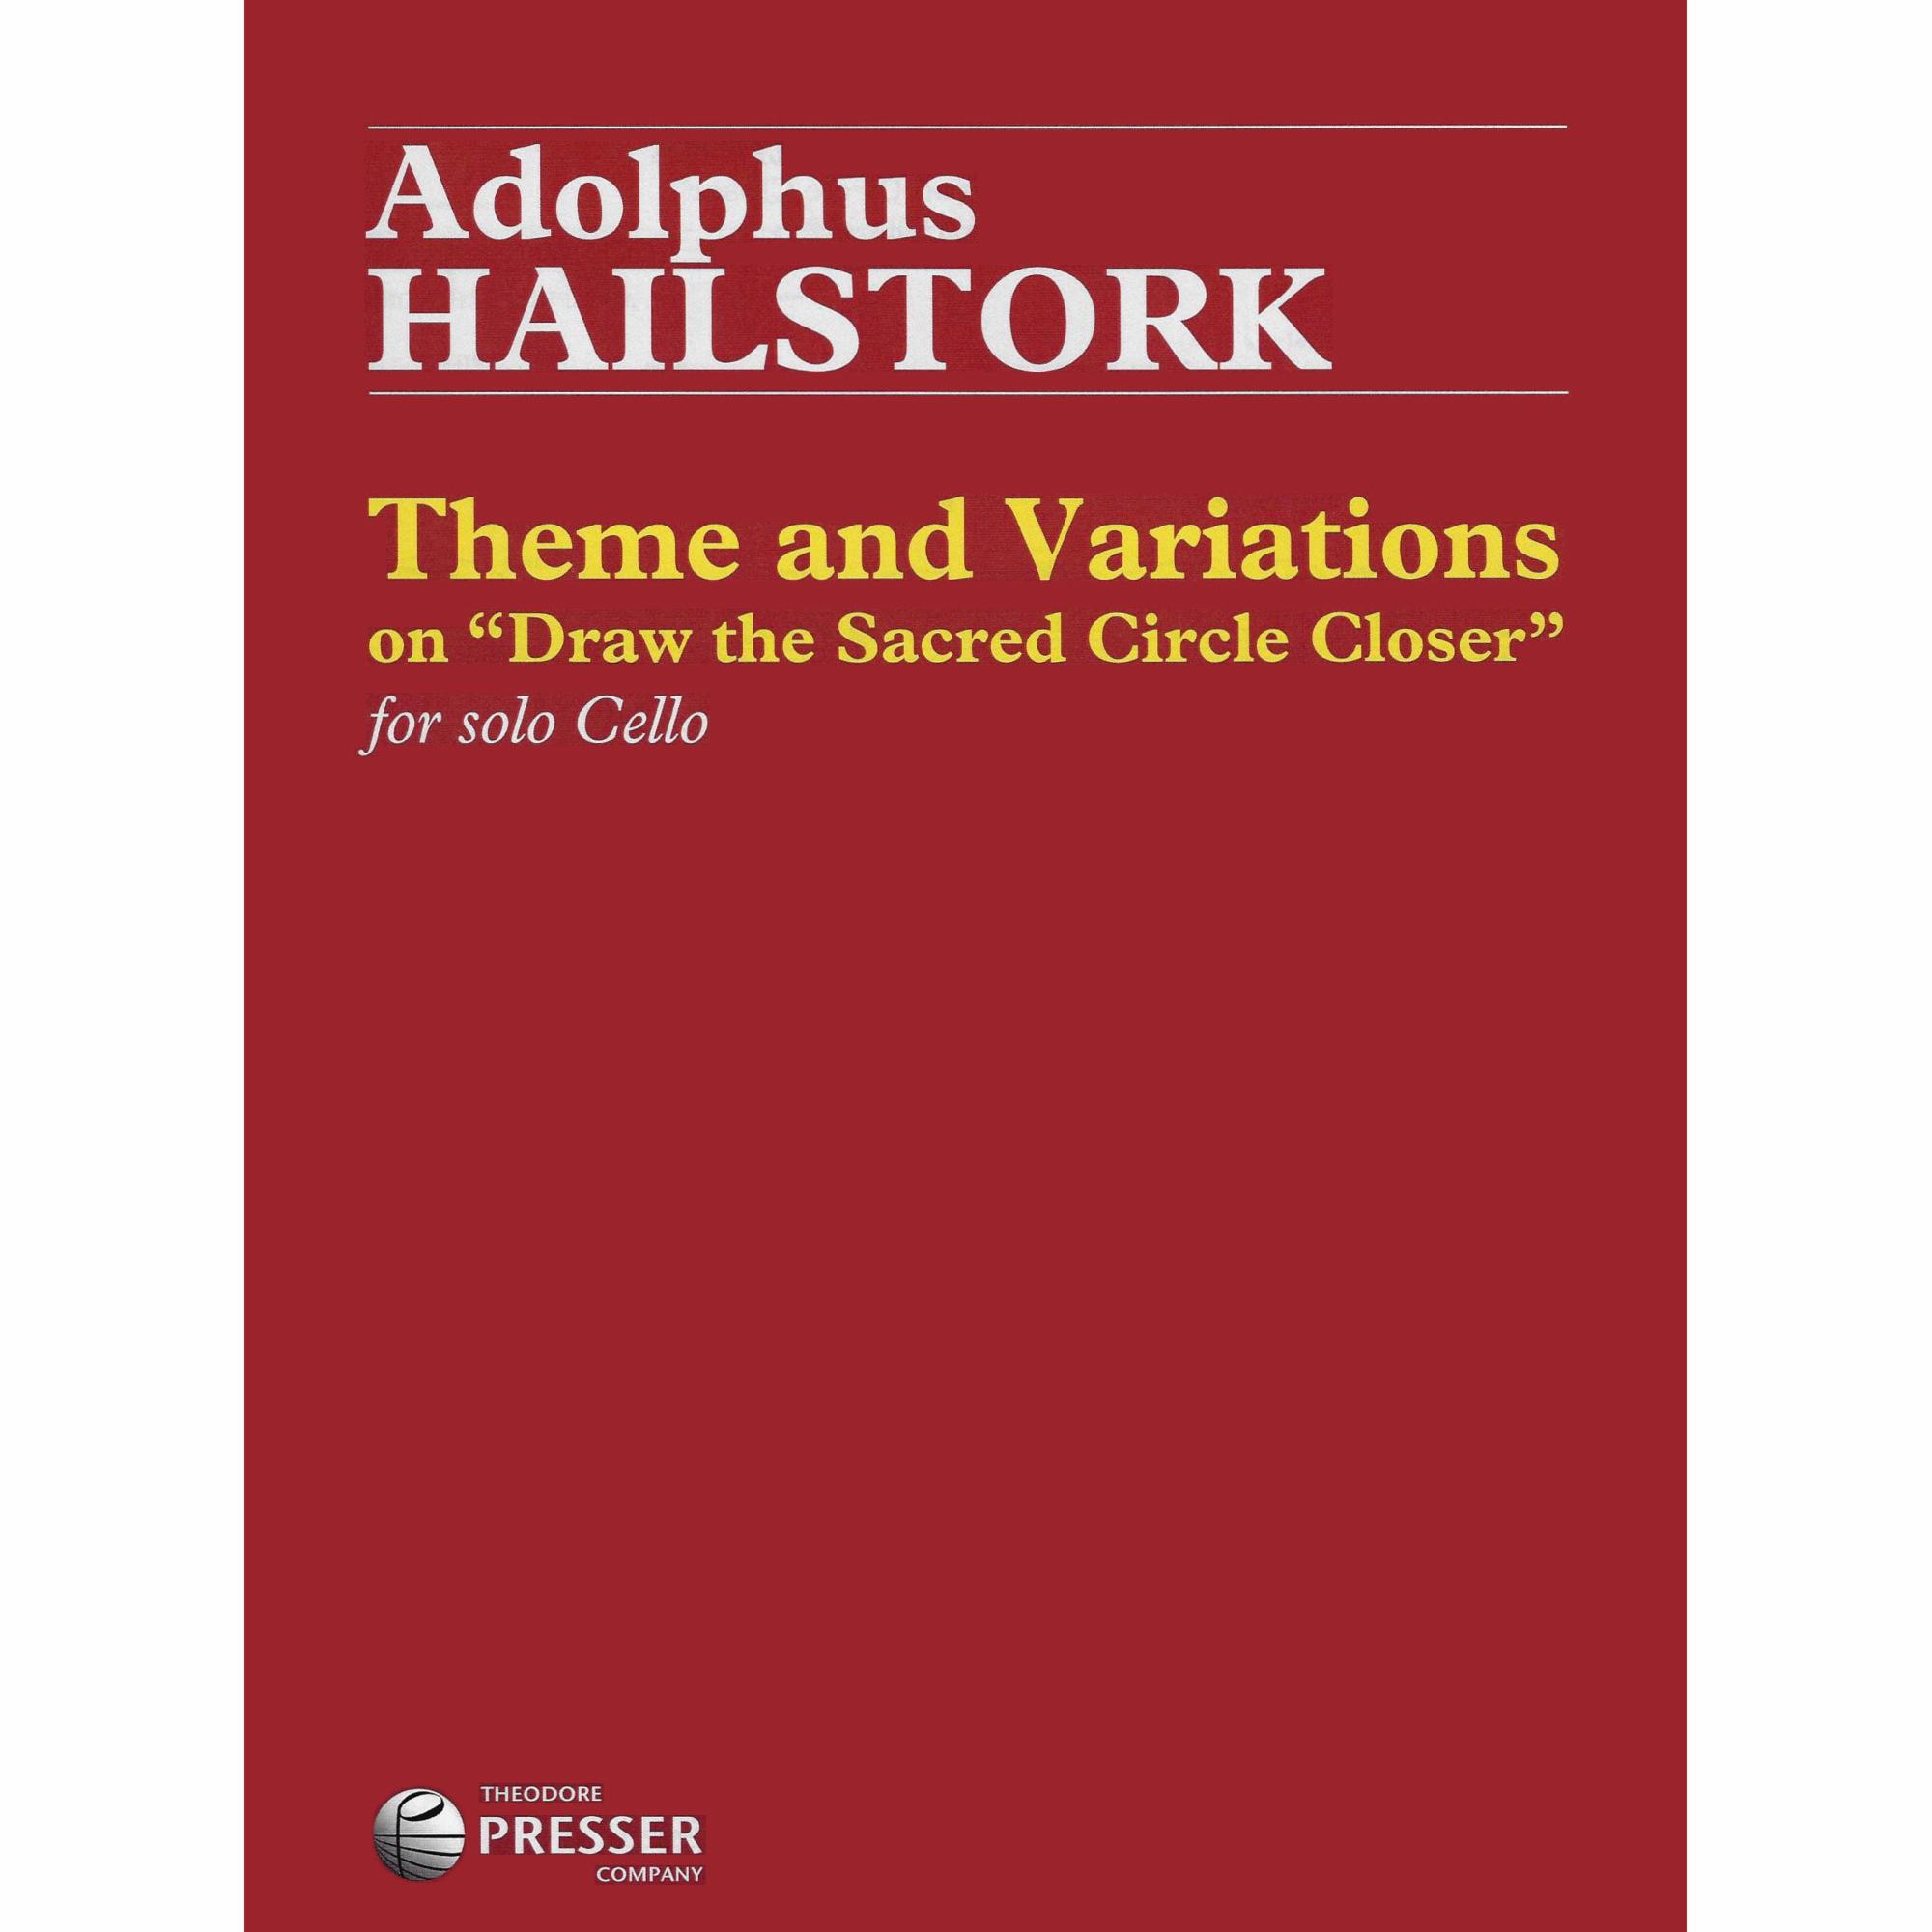 Hailstork -- Theme and Variations on Draw the Sacred Circle Closer for Solo Cello